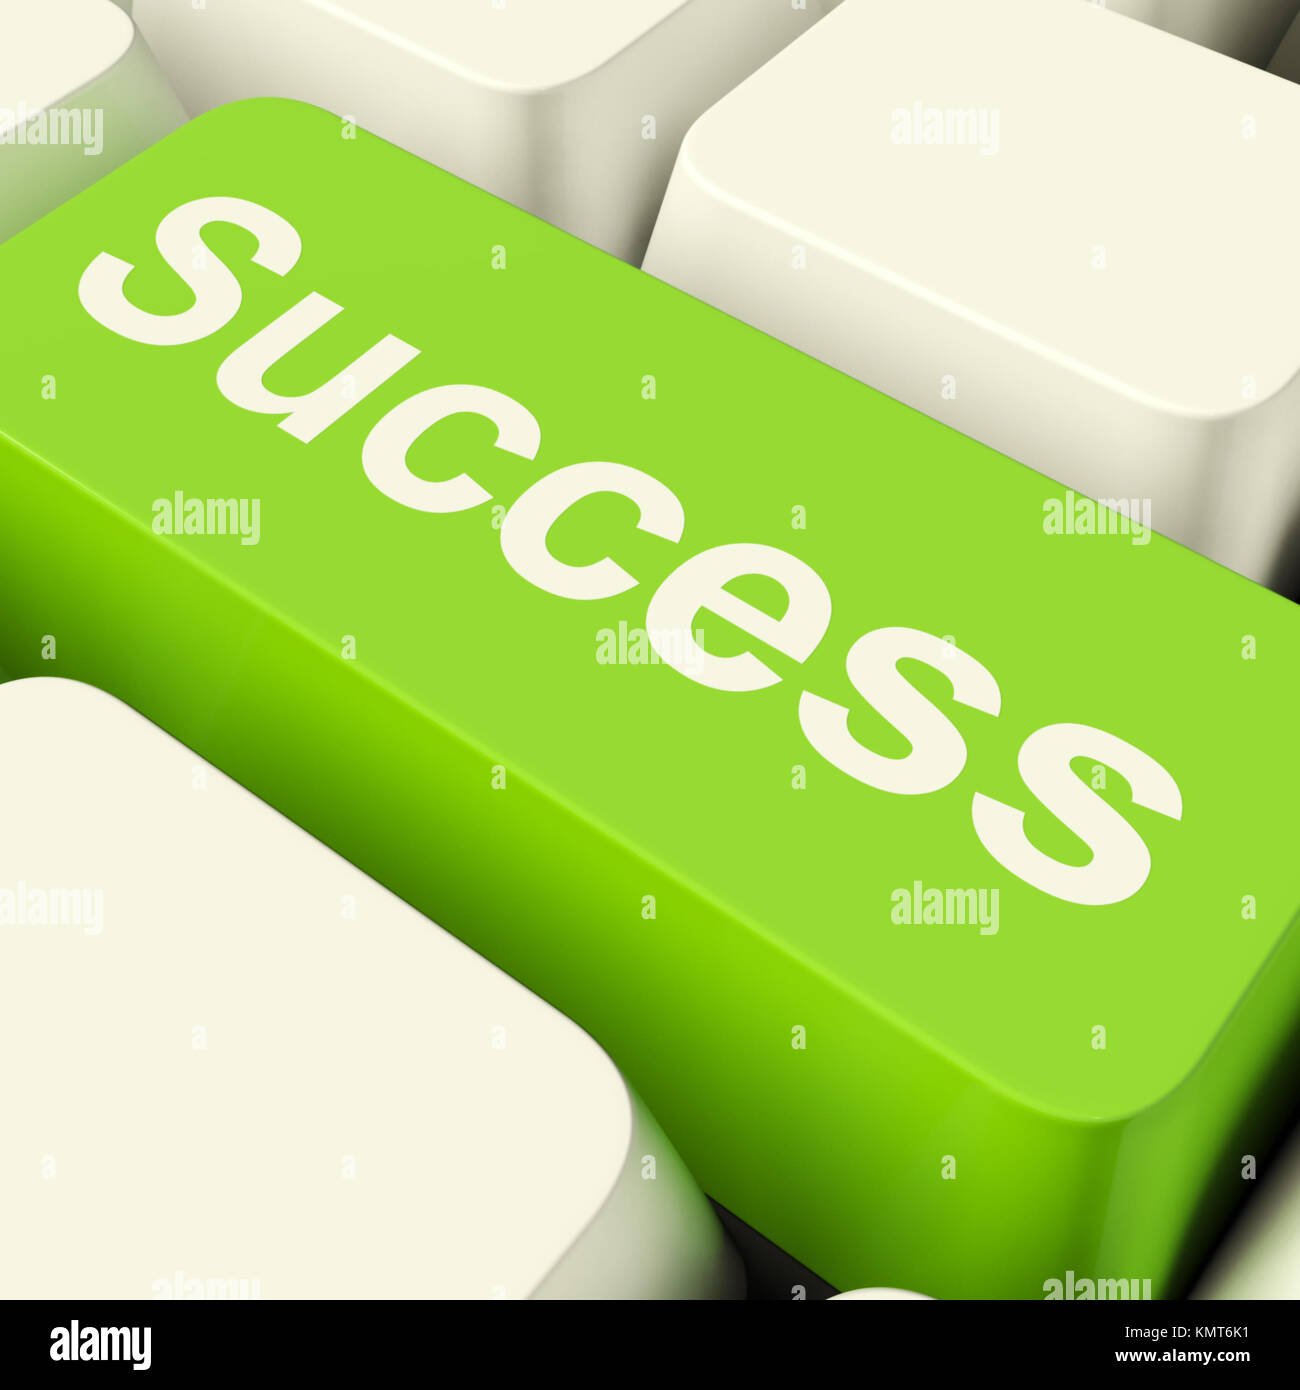 Success Computer Key In Green Showing Achievement And Determinations Stock Photo